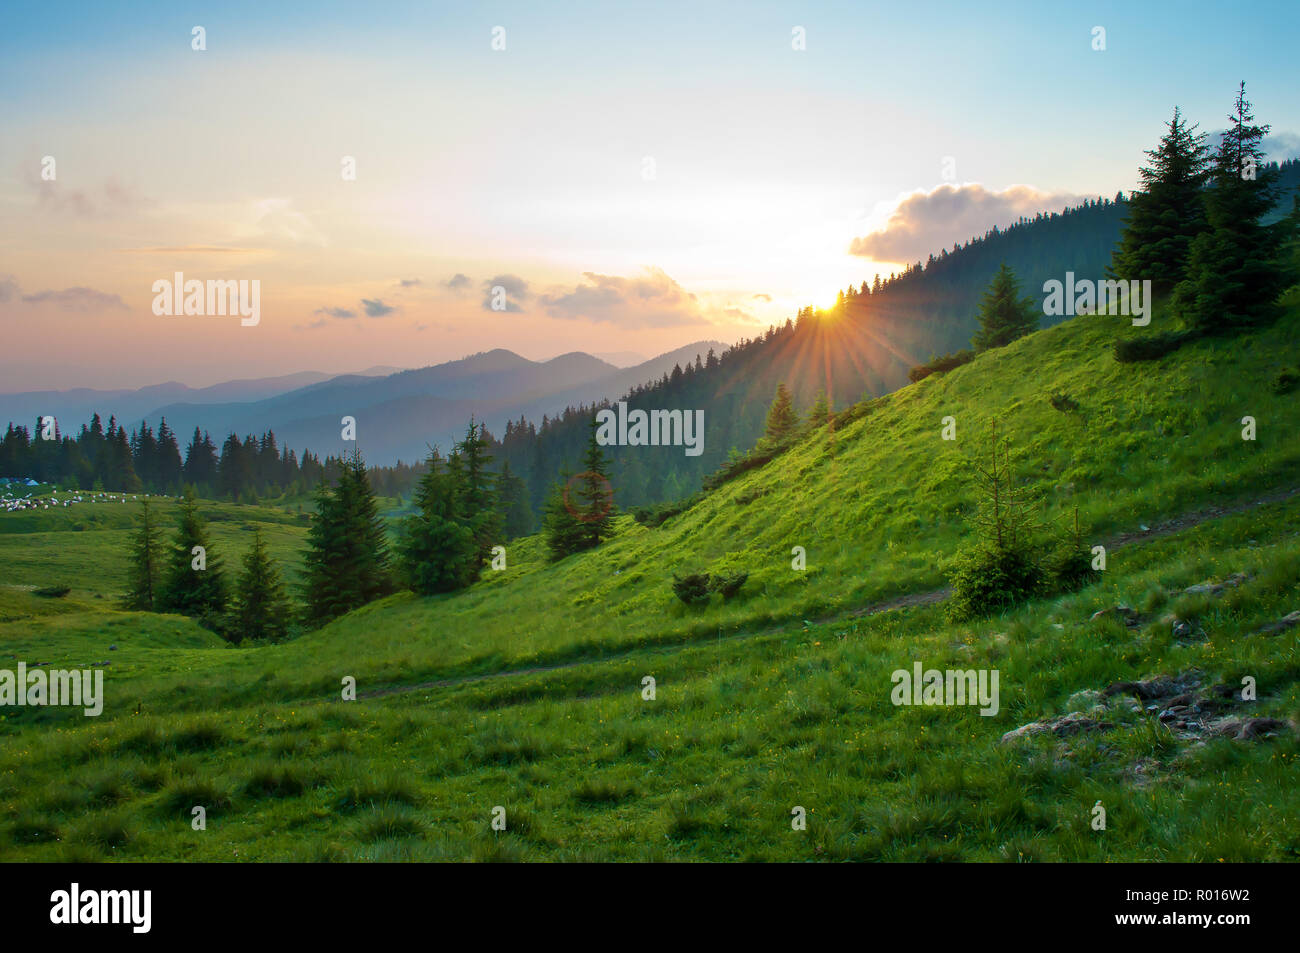 Sun setting behind spruce trees on a lush green slope. Tiny figures of sheep in the distance. Several clouds in the sky at sunset. Warm summer evening Stock Photo